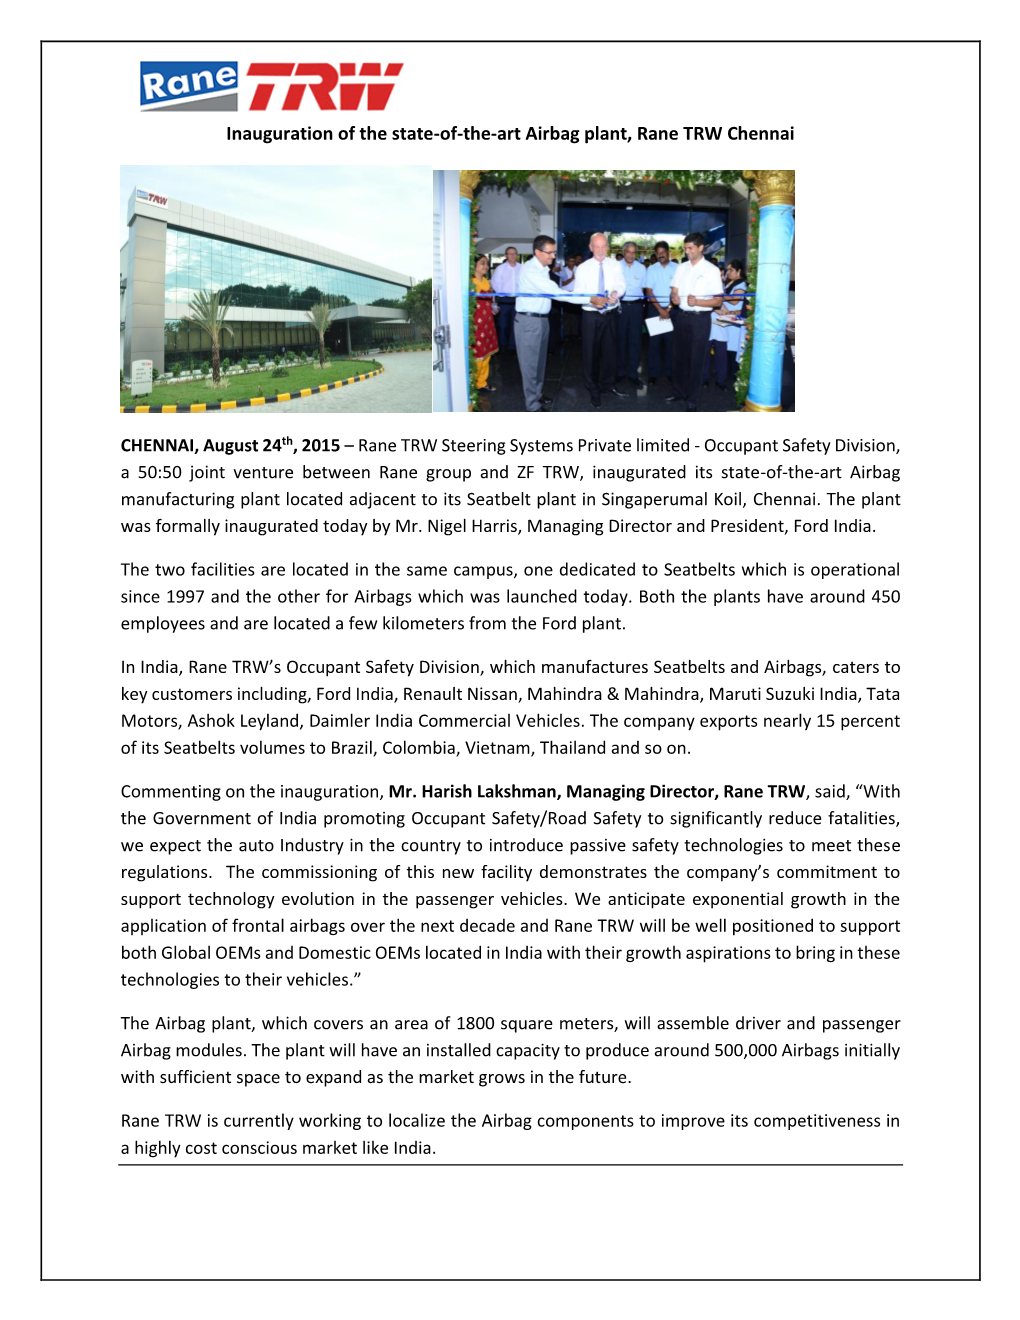 Inauguration of the State-Of-The-Art Airbag Plant, Rane TRW Chennai